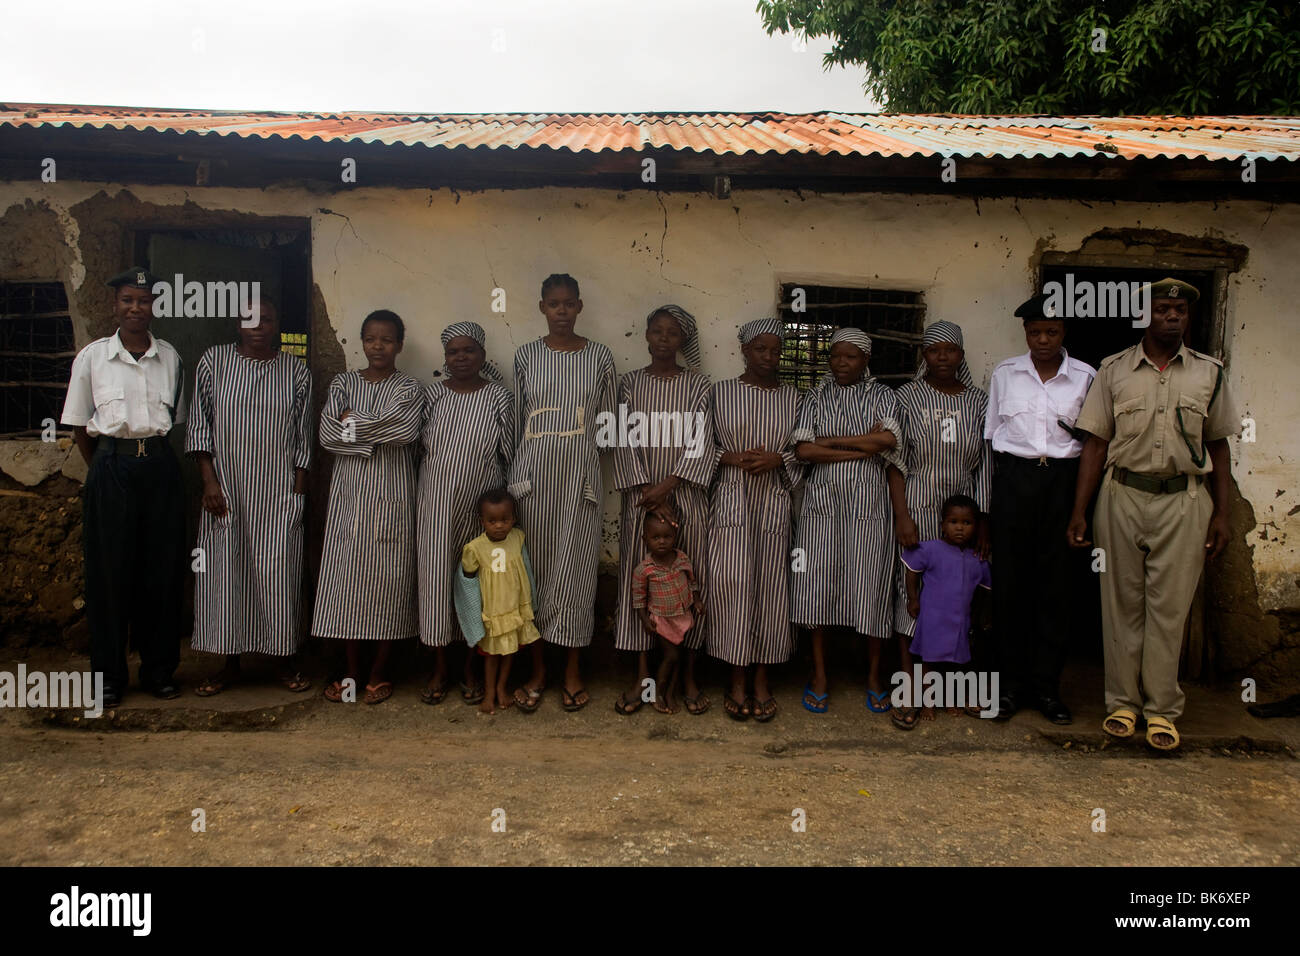 Women prisoners with their children and police officers on their sides pose at aprison on the coast of Kenya on October 15, 2009 Stock Photo